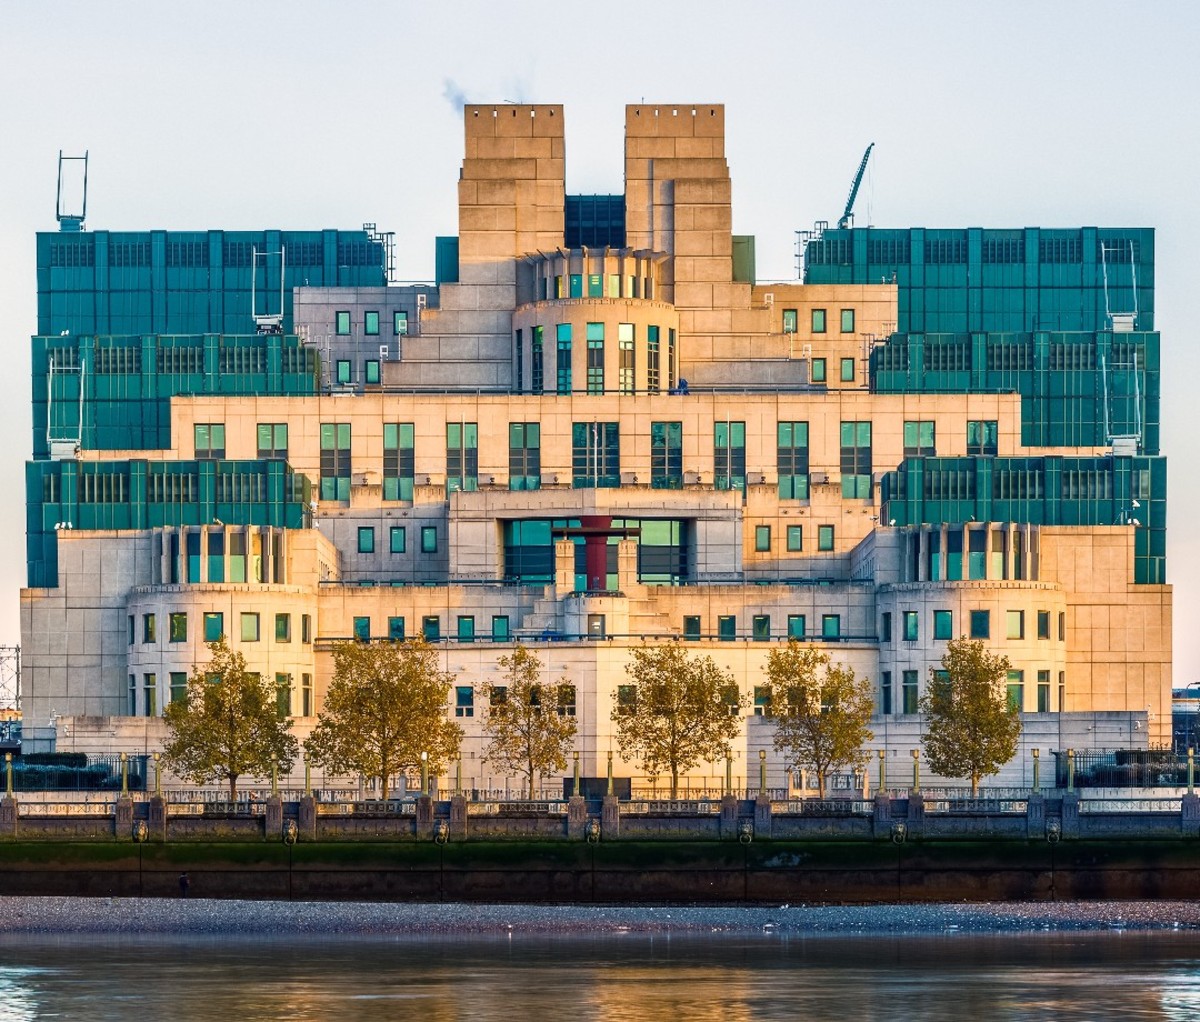 The SIS or MI6 building in London.